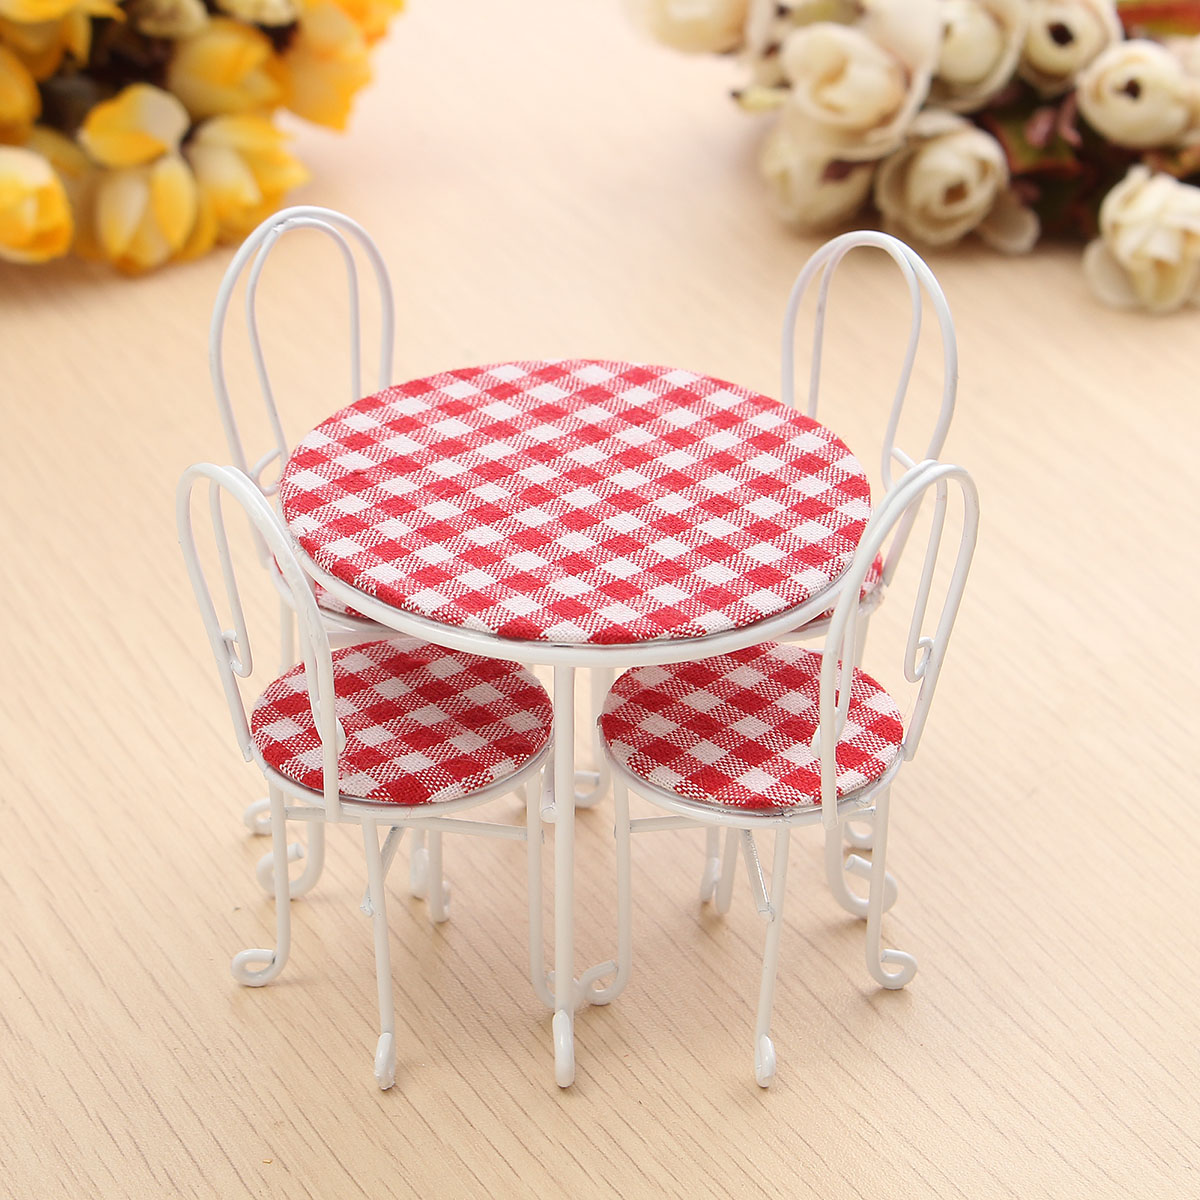 

1/12 Scale Dining-table Chair Set Dollhouse Miniature Furniture Accessories For Dollhouse